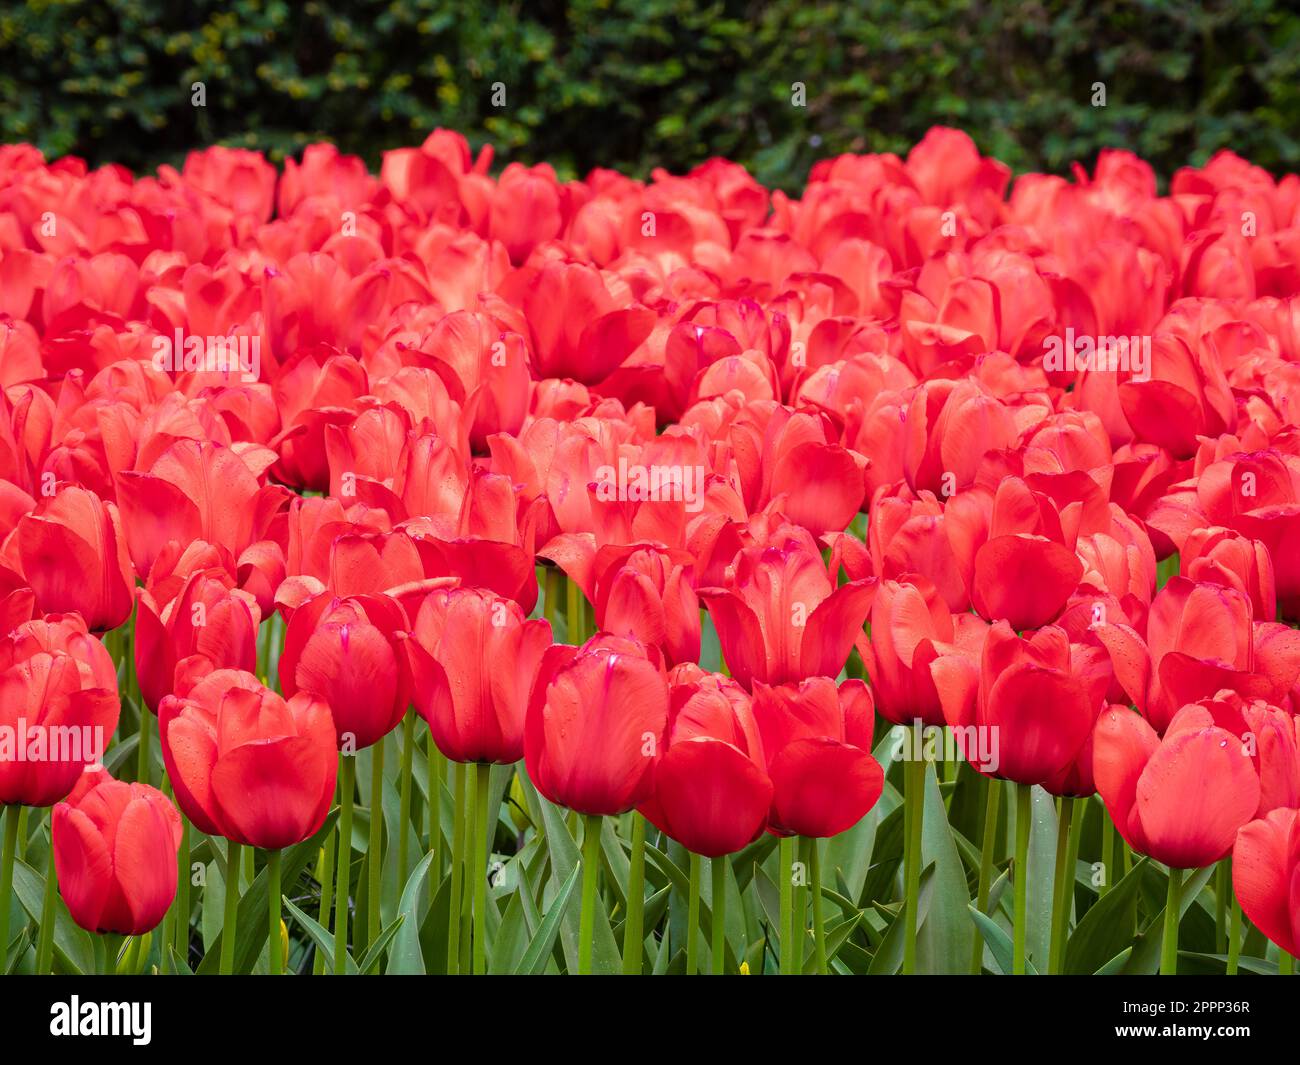 A vibrant field of red tulips in full bloom, their petals expressing the beauty and fragility of natures growth. Stock Photo